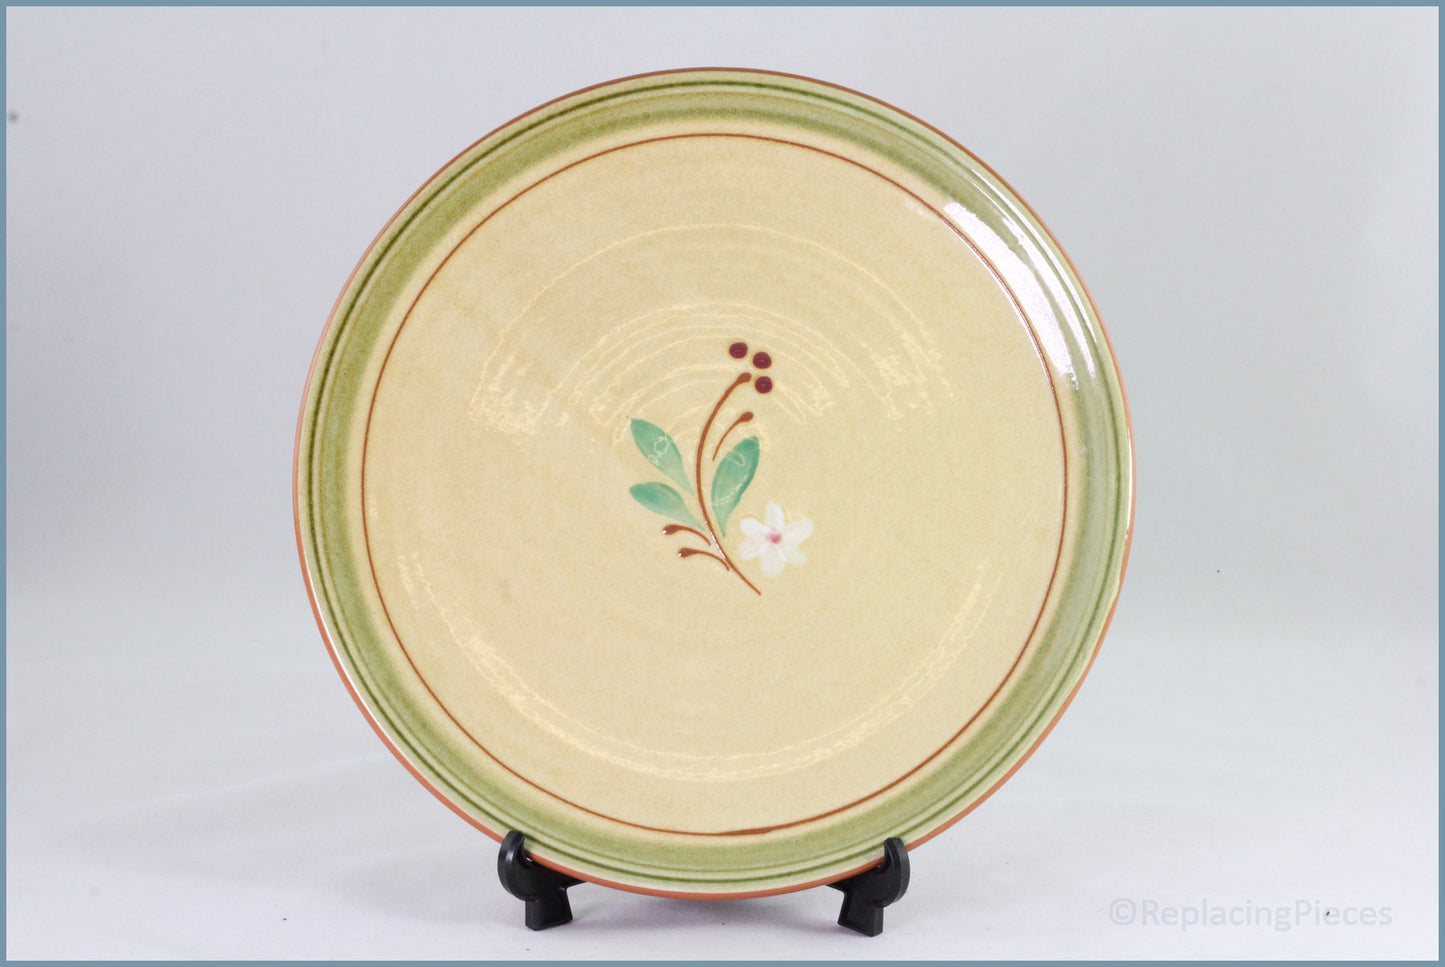 Marks & Spencer - Vintage Farmhouse - 9 1/8" Luncheon Plate